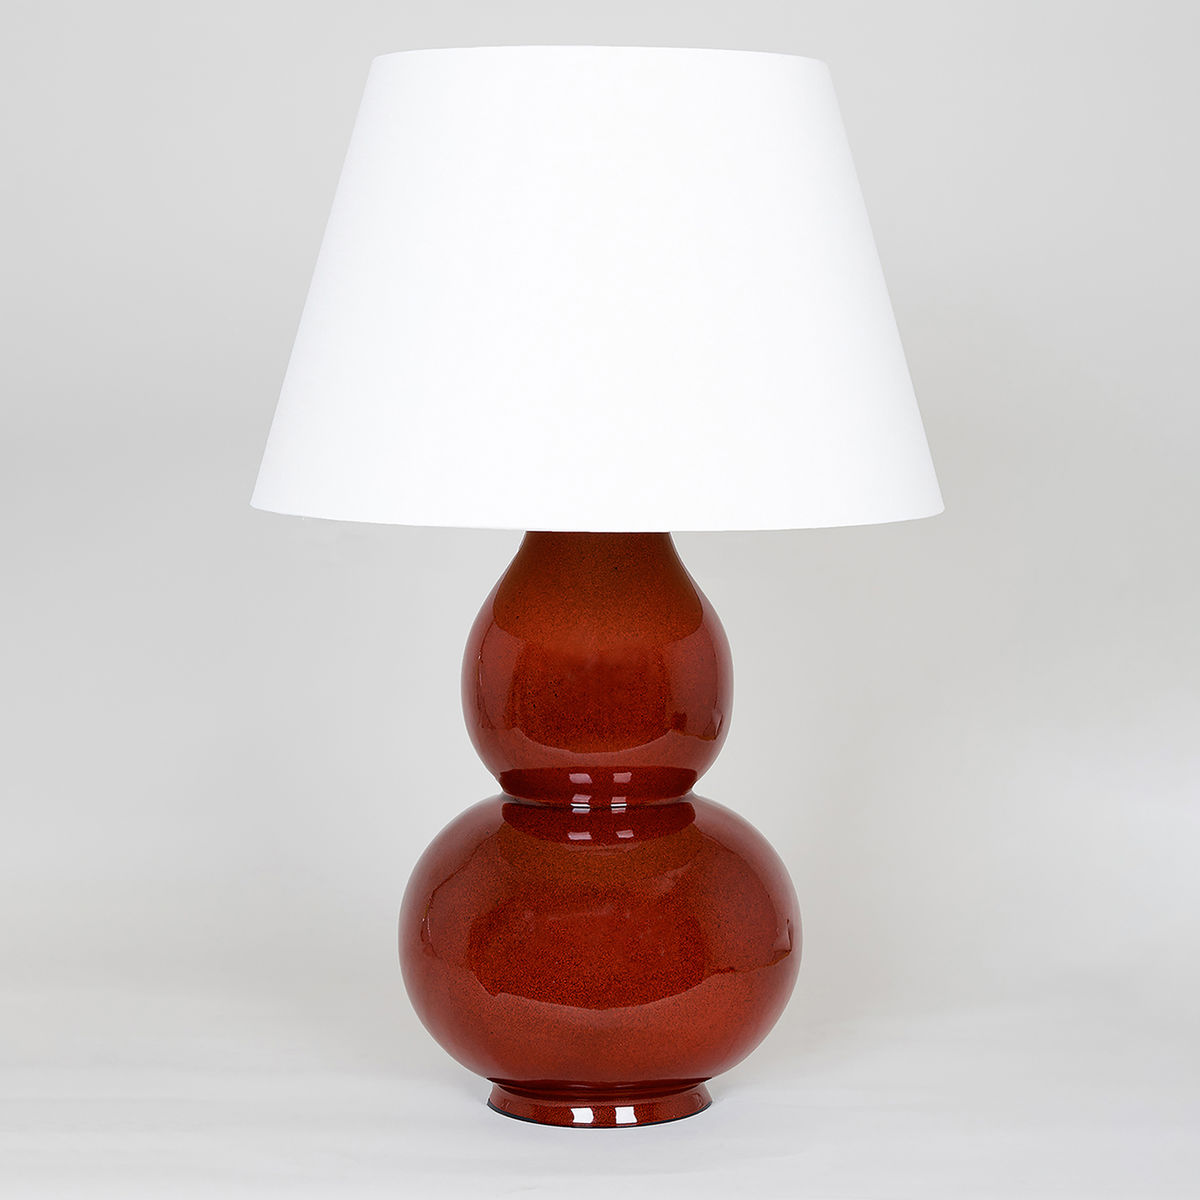 Gourd Shaped Vase Table Lamp in Sang de Boeuf Red with Linen Laminated Lampshade